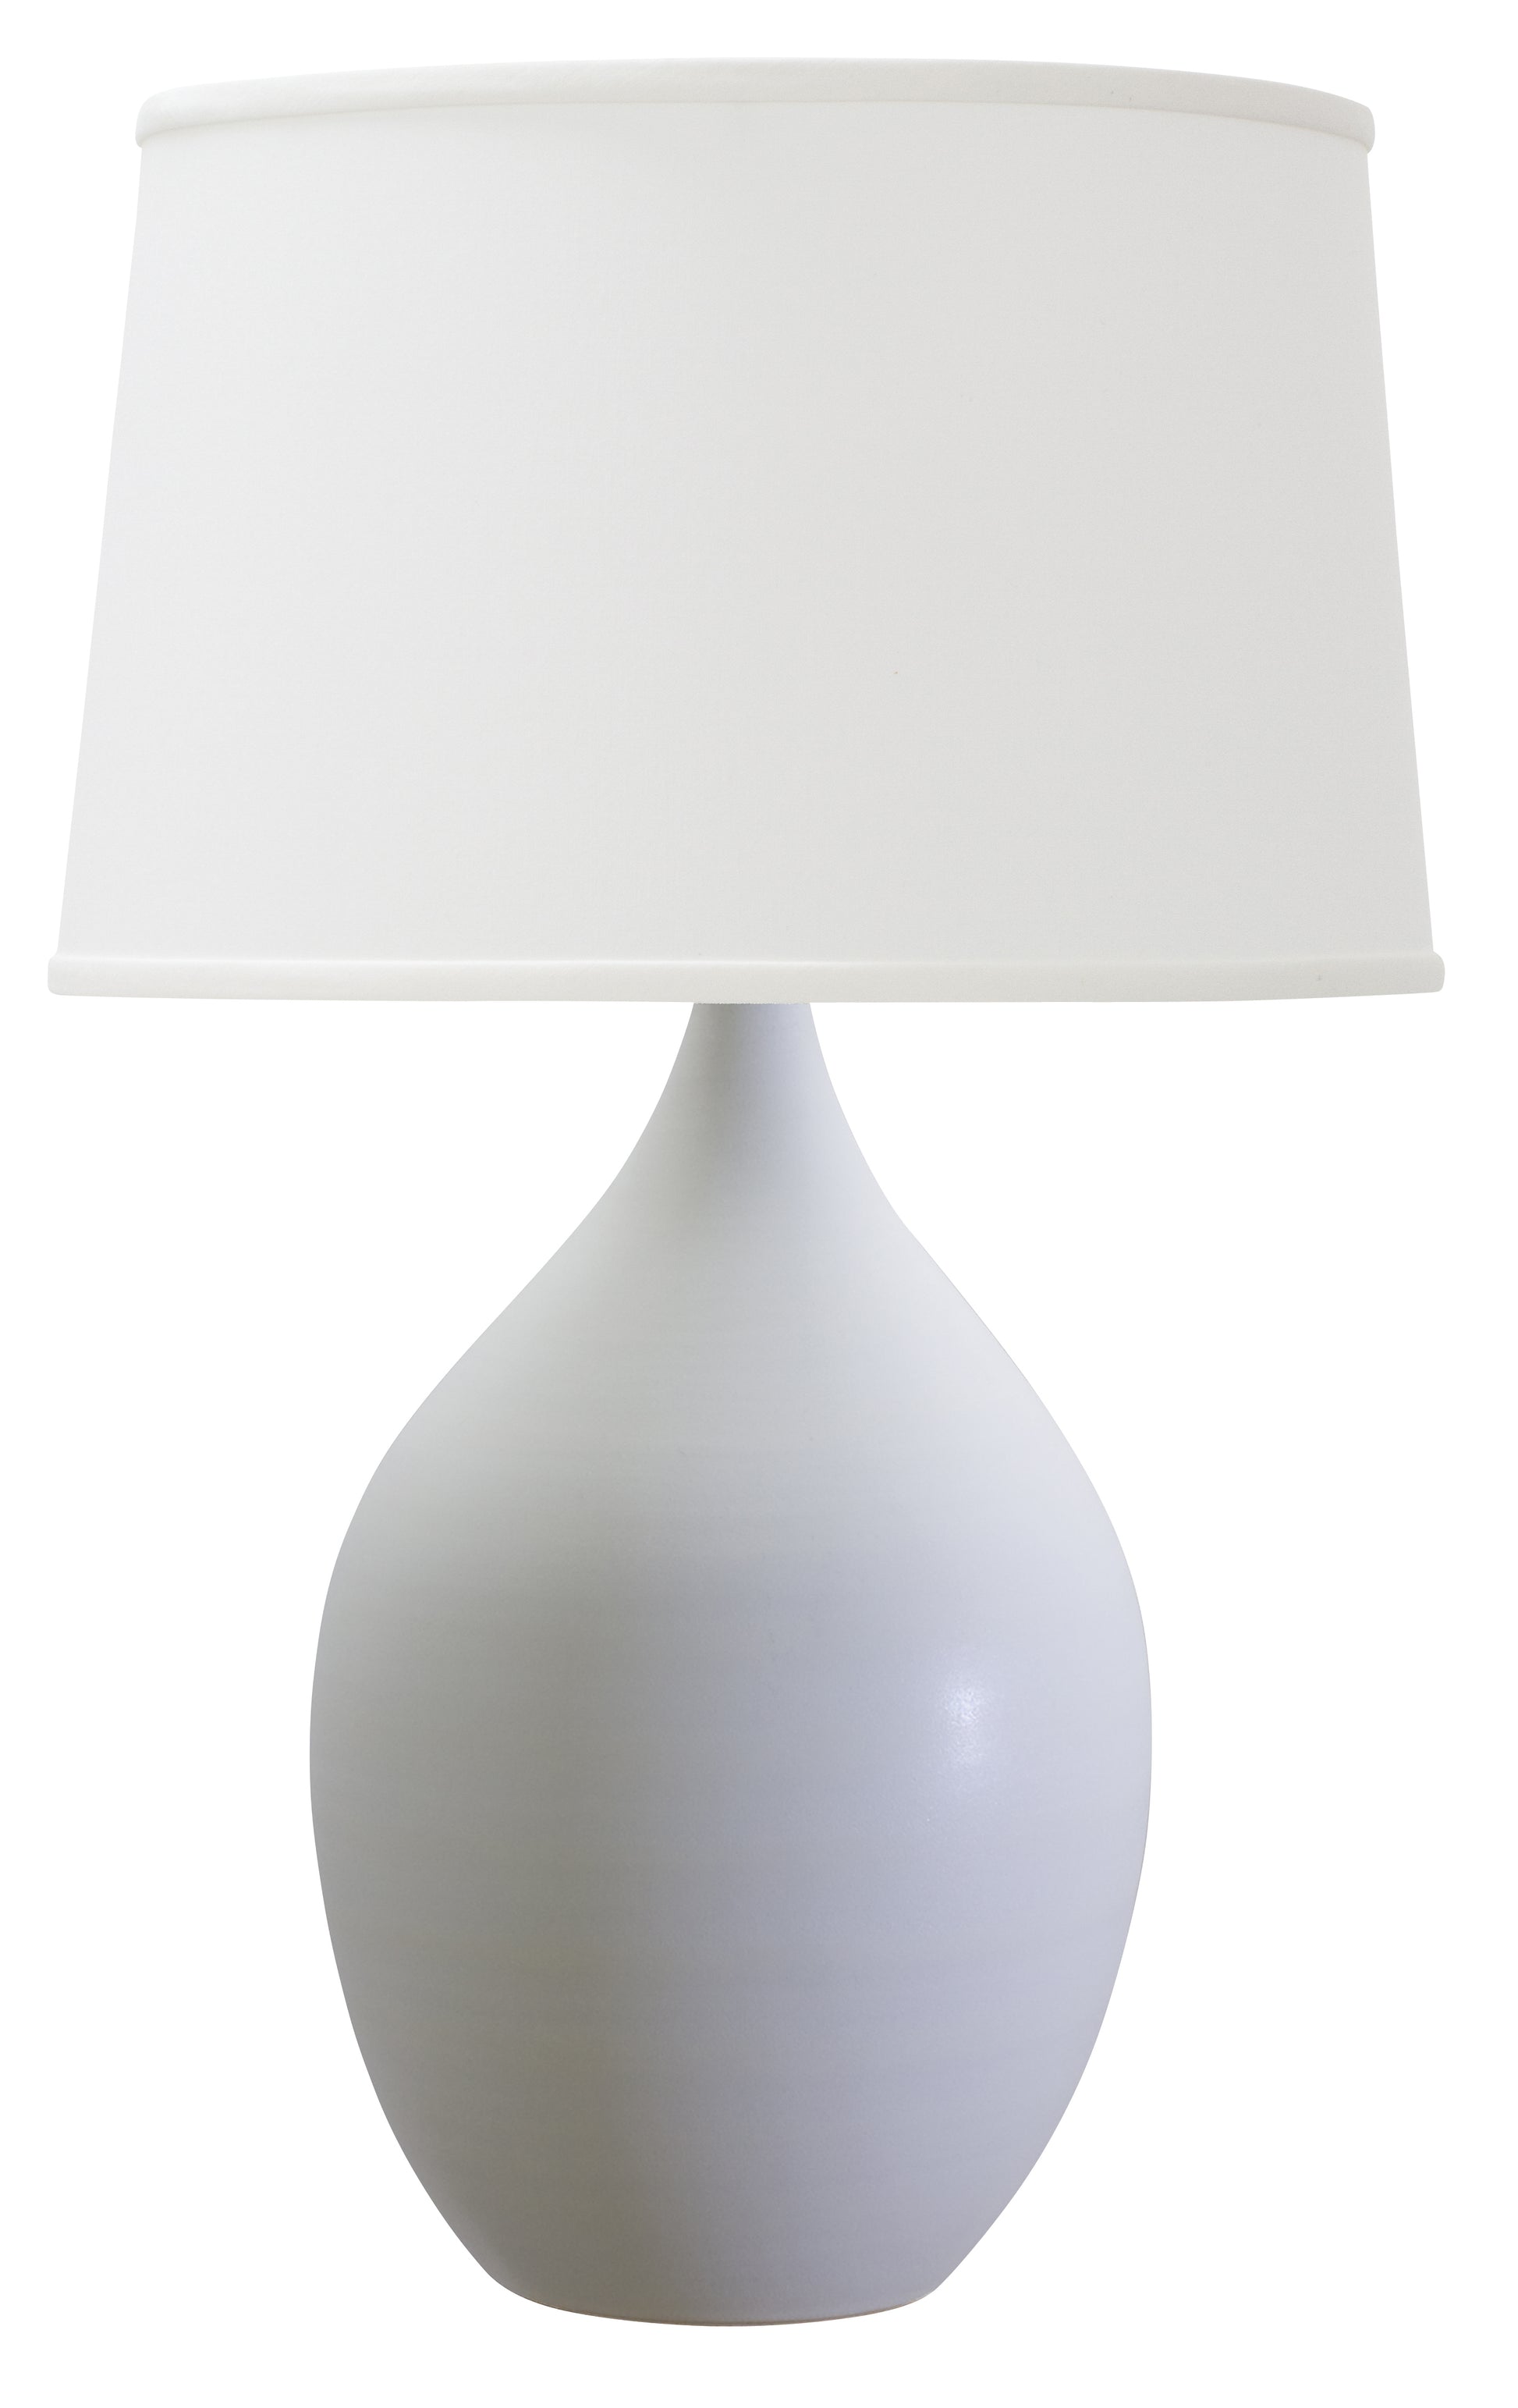 House of Troy Scatchard 21" Stoneware Table Lamp in White Matte GS302-WM